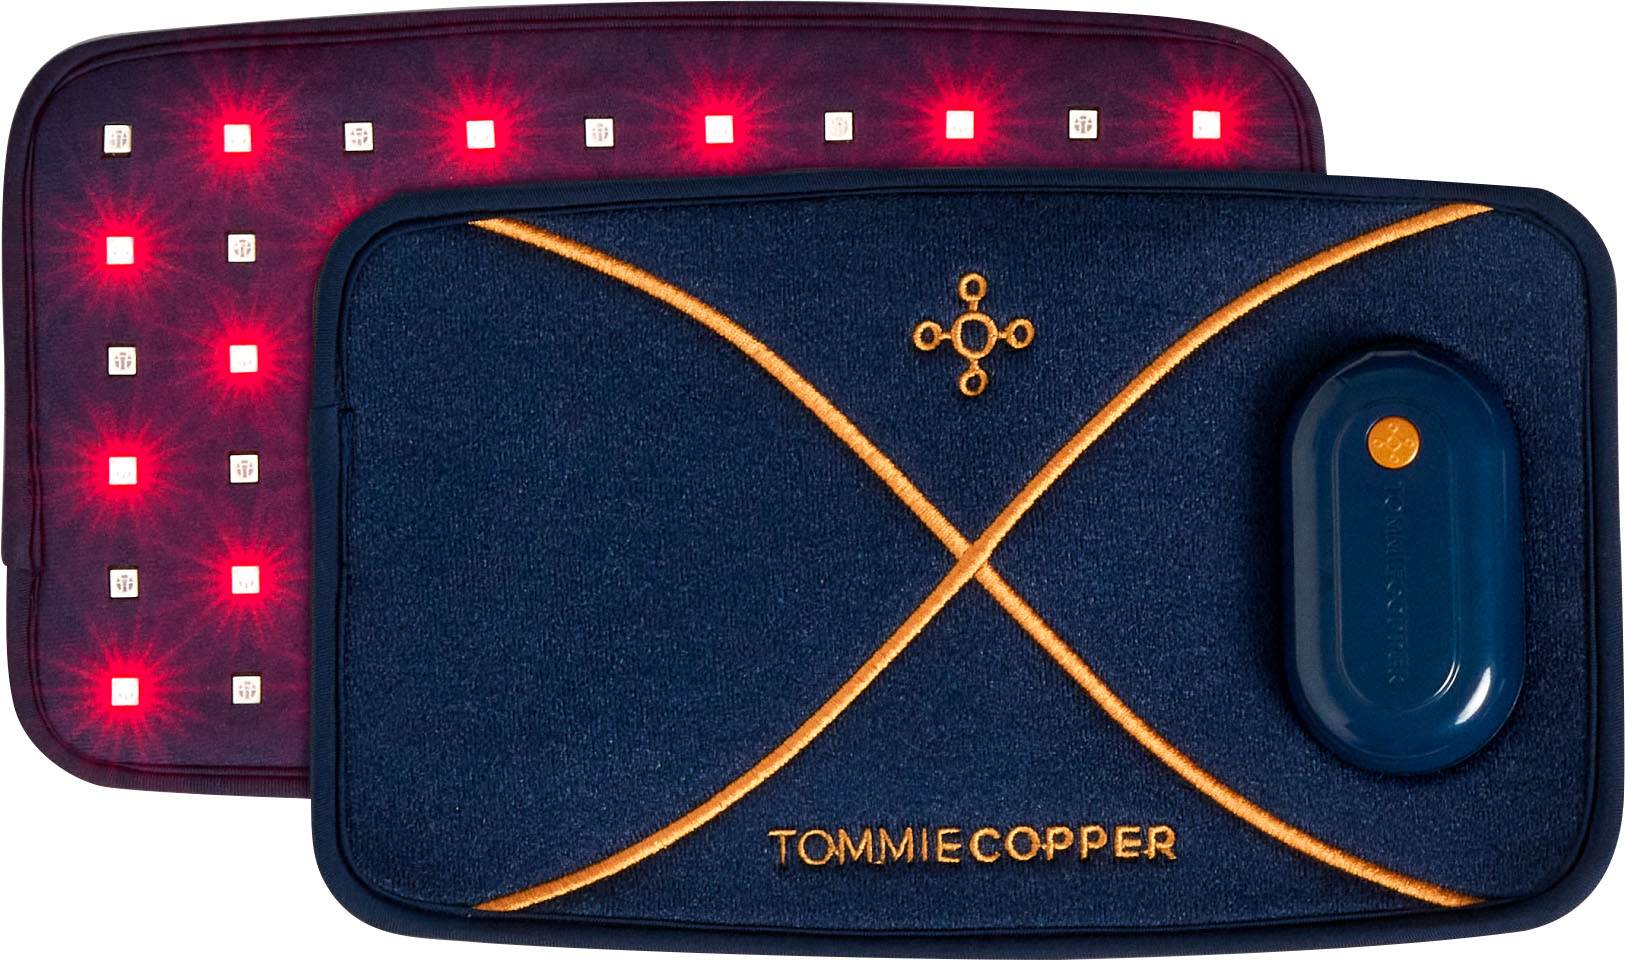 Tommie Copper Infrared Light Therapy Flex Pad Dark Navy 5007LD - Best Buy